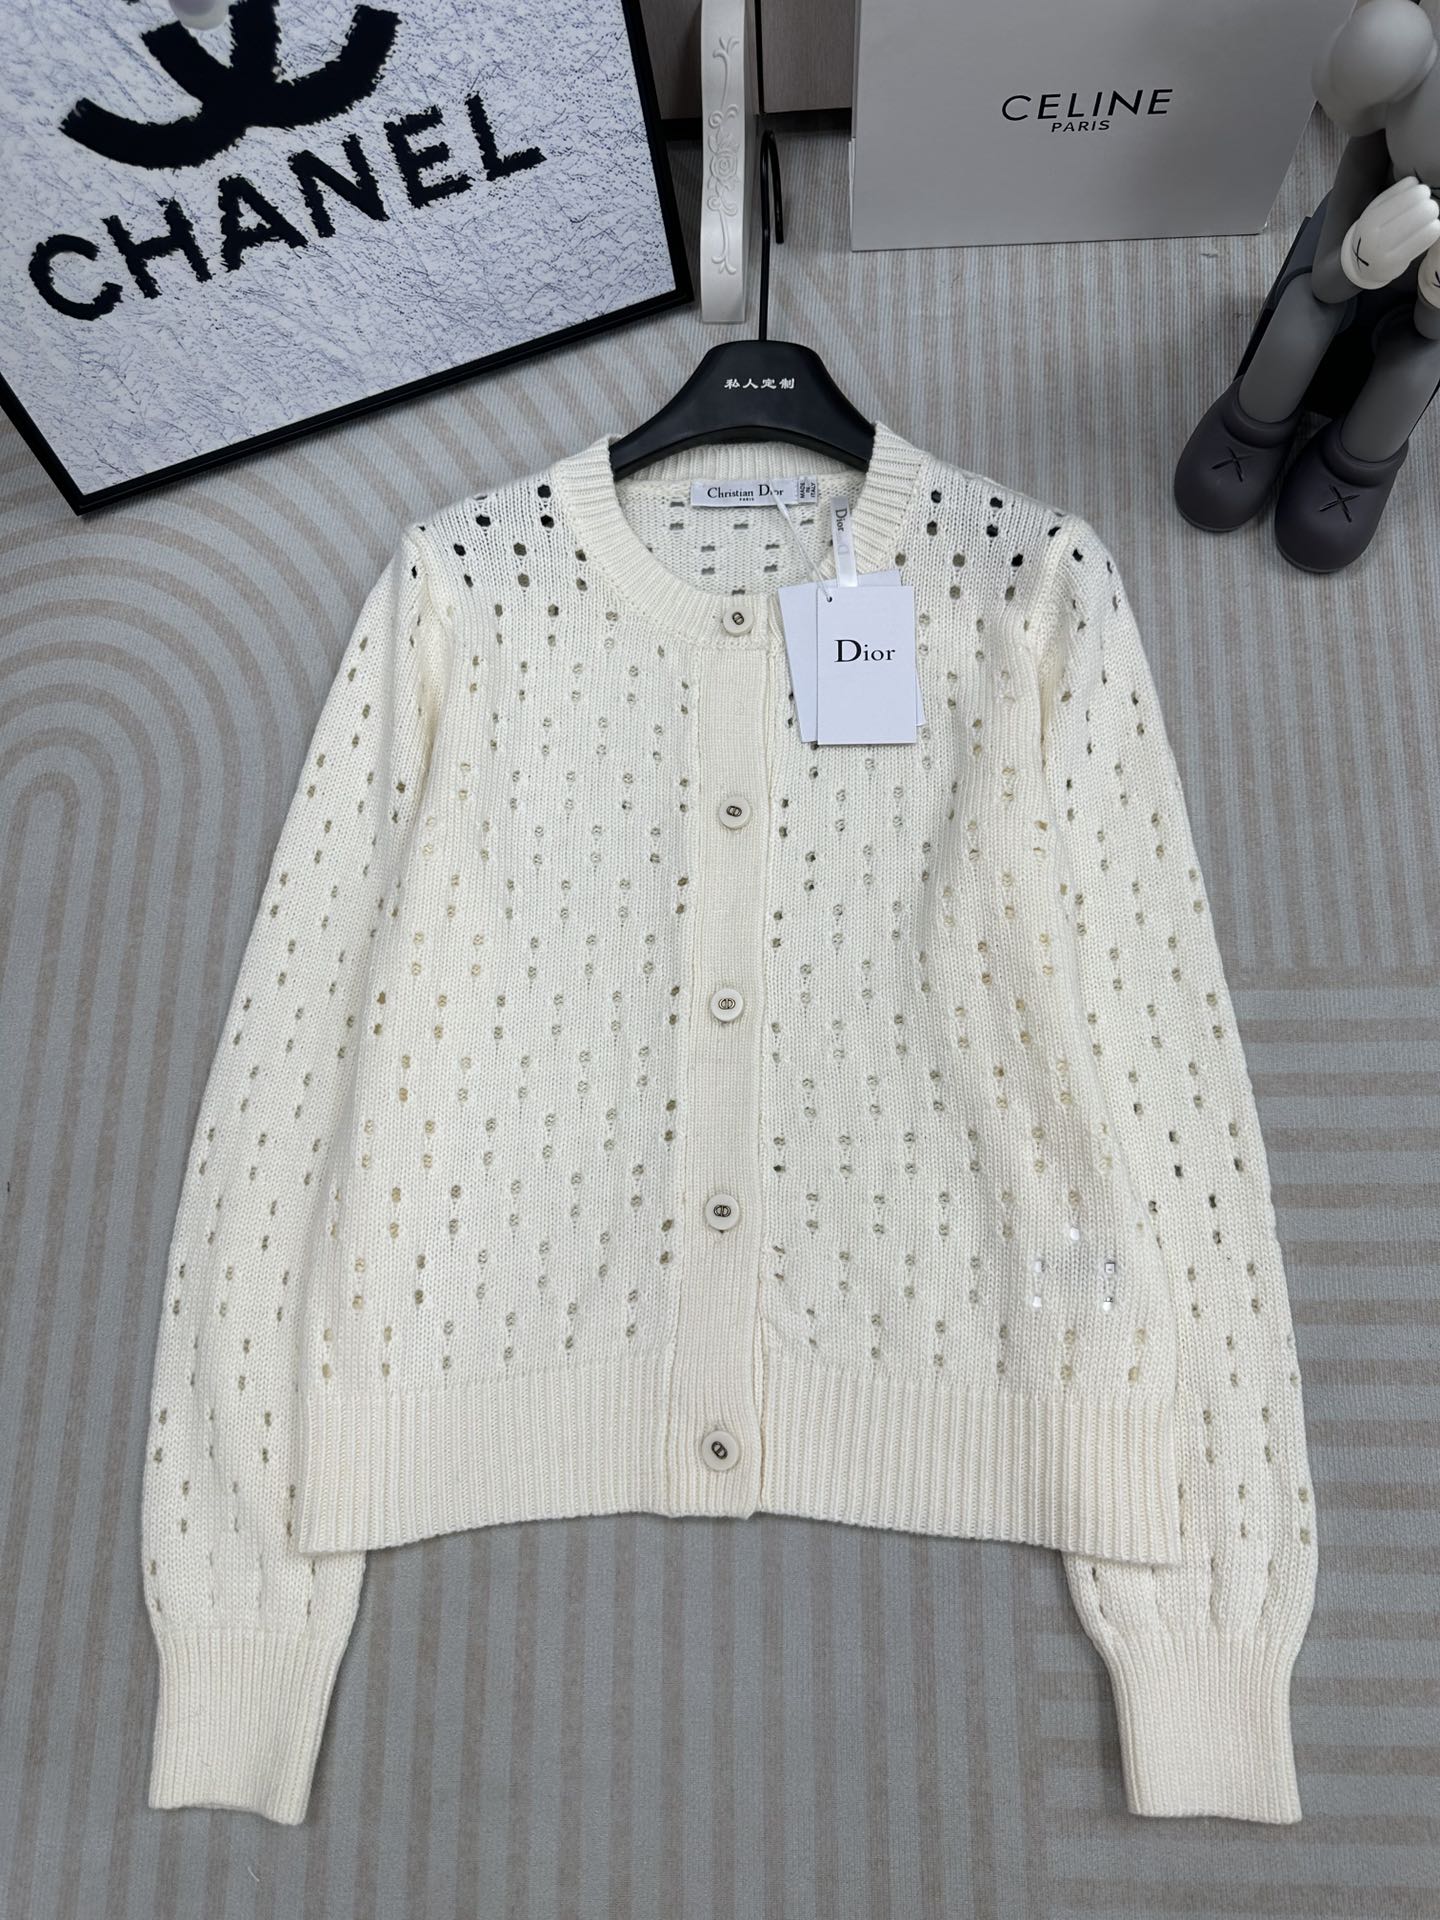 Dior Clothing Cardigans Openwork Cashmere Knitting Wool Spring Collection